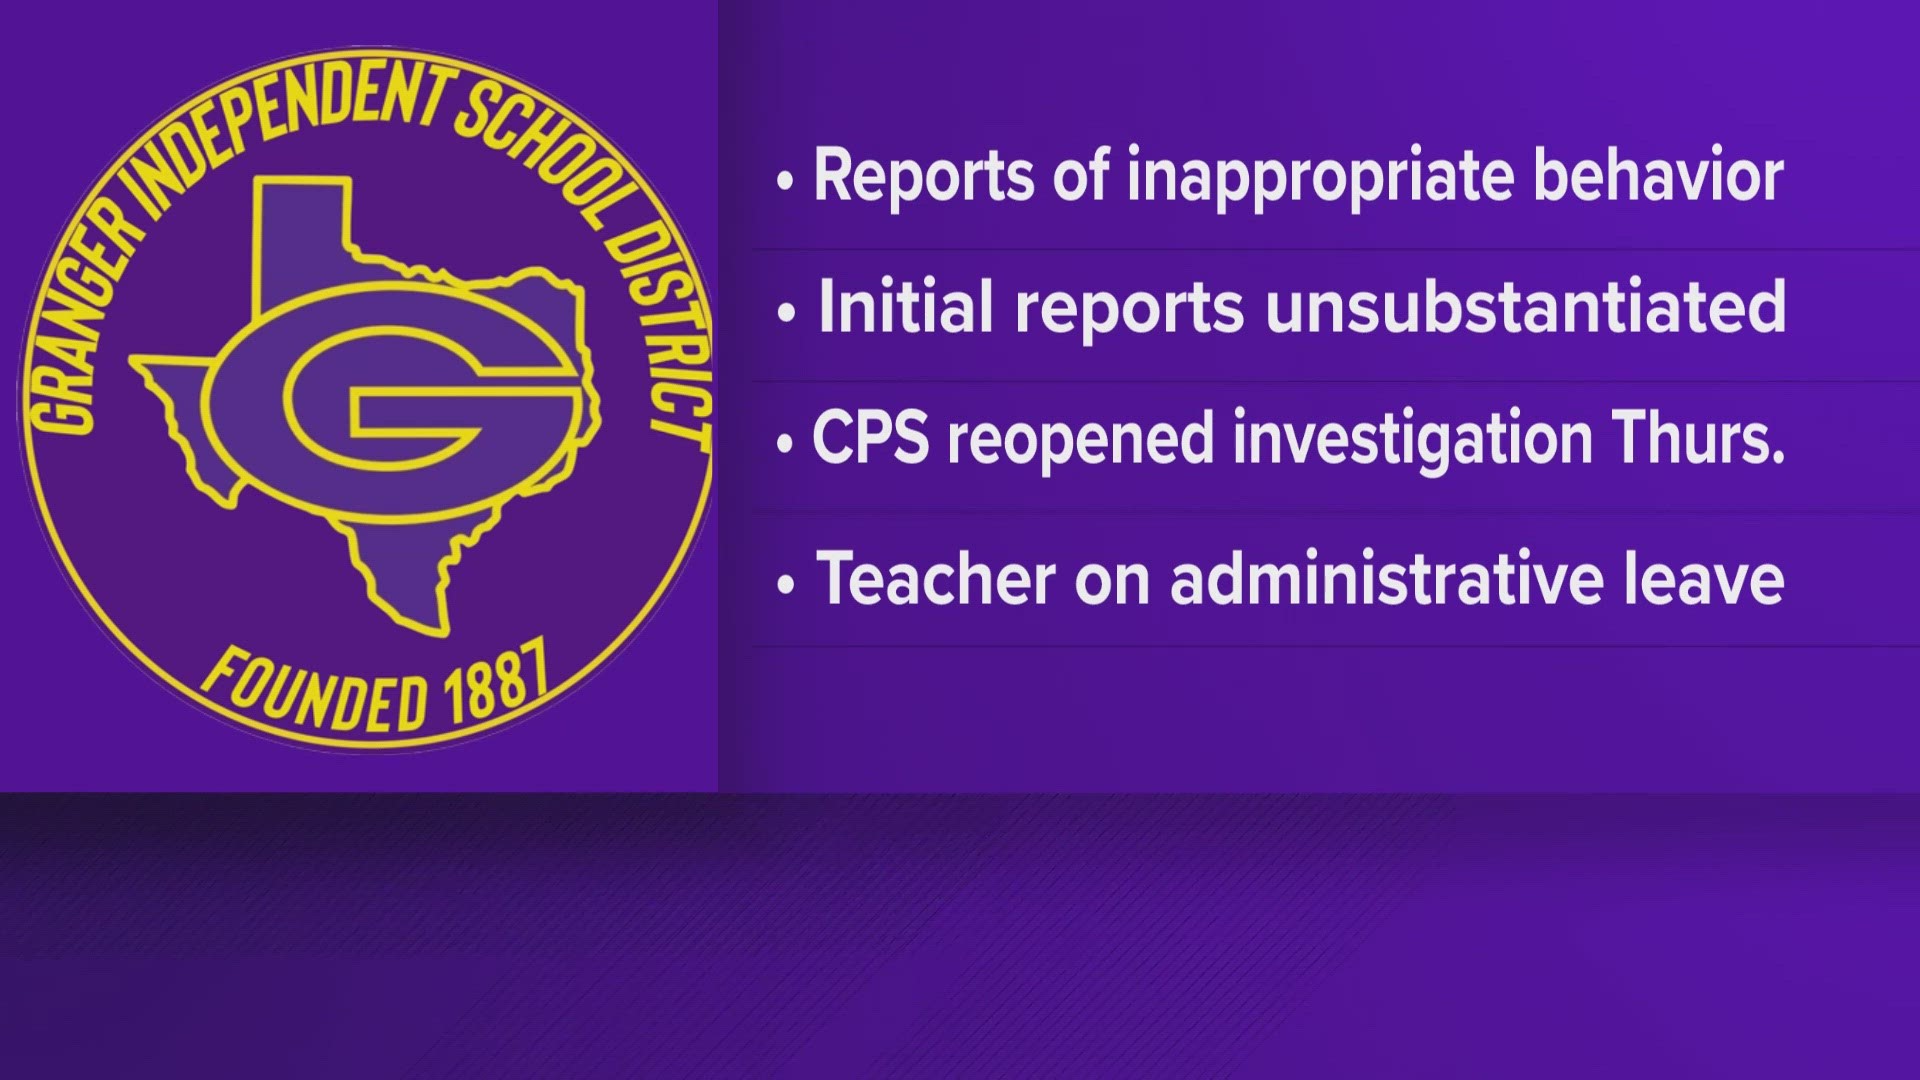 A Granger ISD teacher is on administrative leave after reports of inappropriate behavior in the classroom.